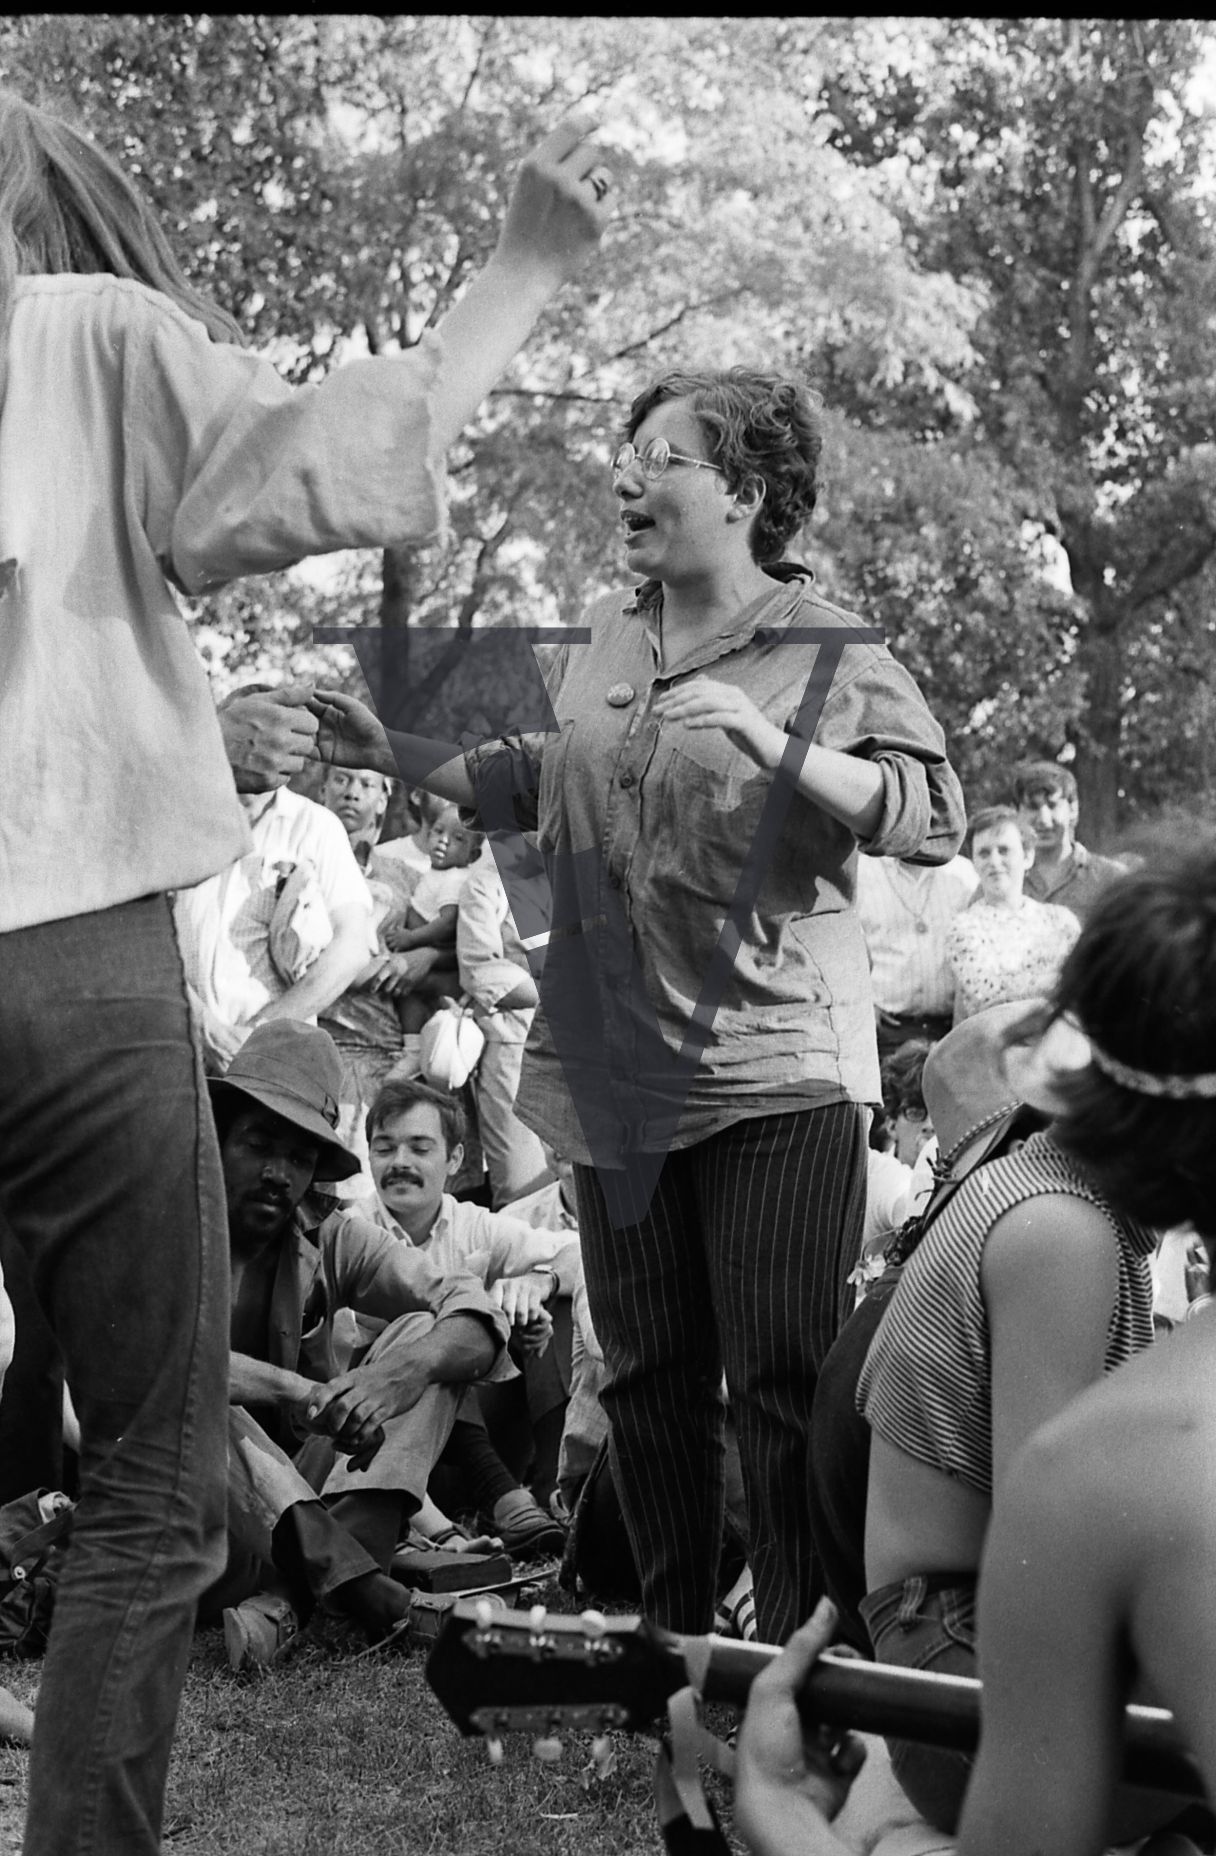 Chicago, Anti-war rallies in Lincoln Park, woman with glasses dances in crowd.